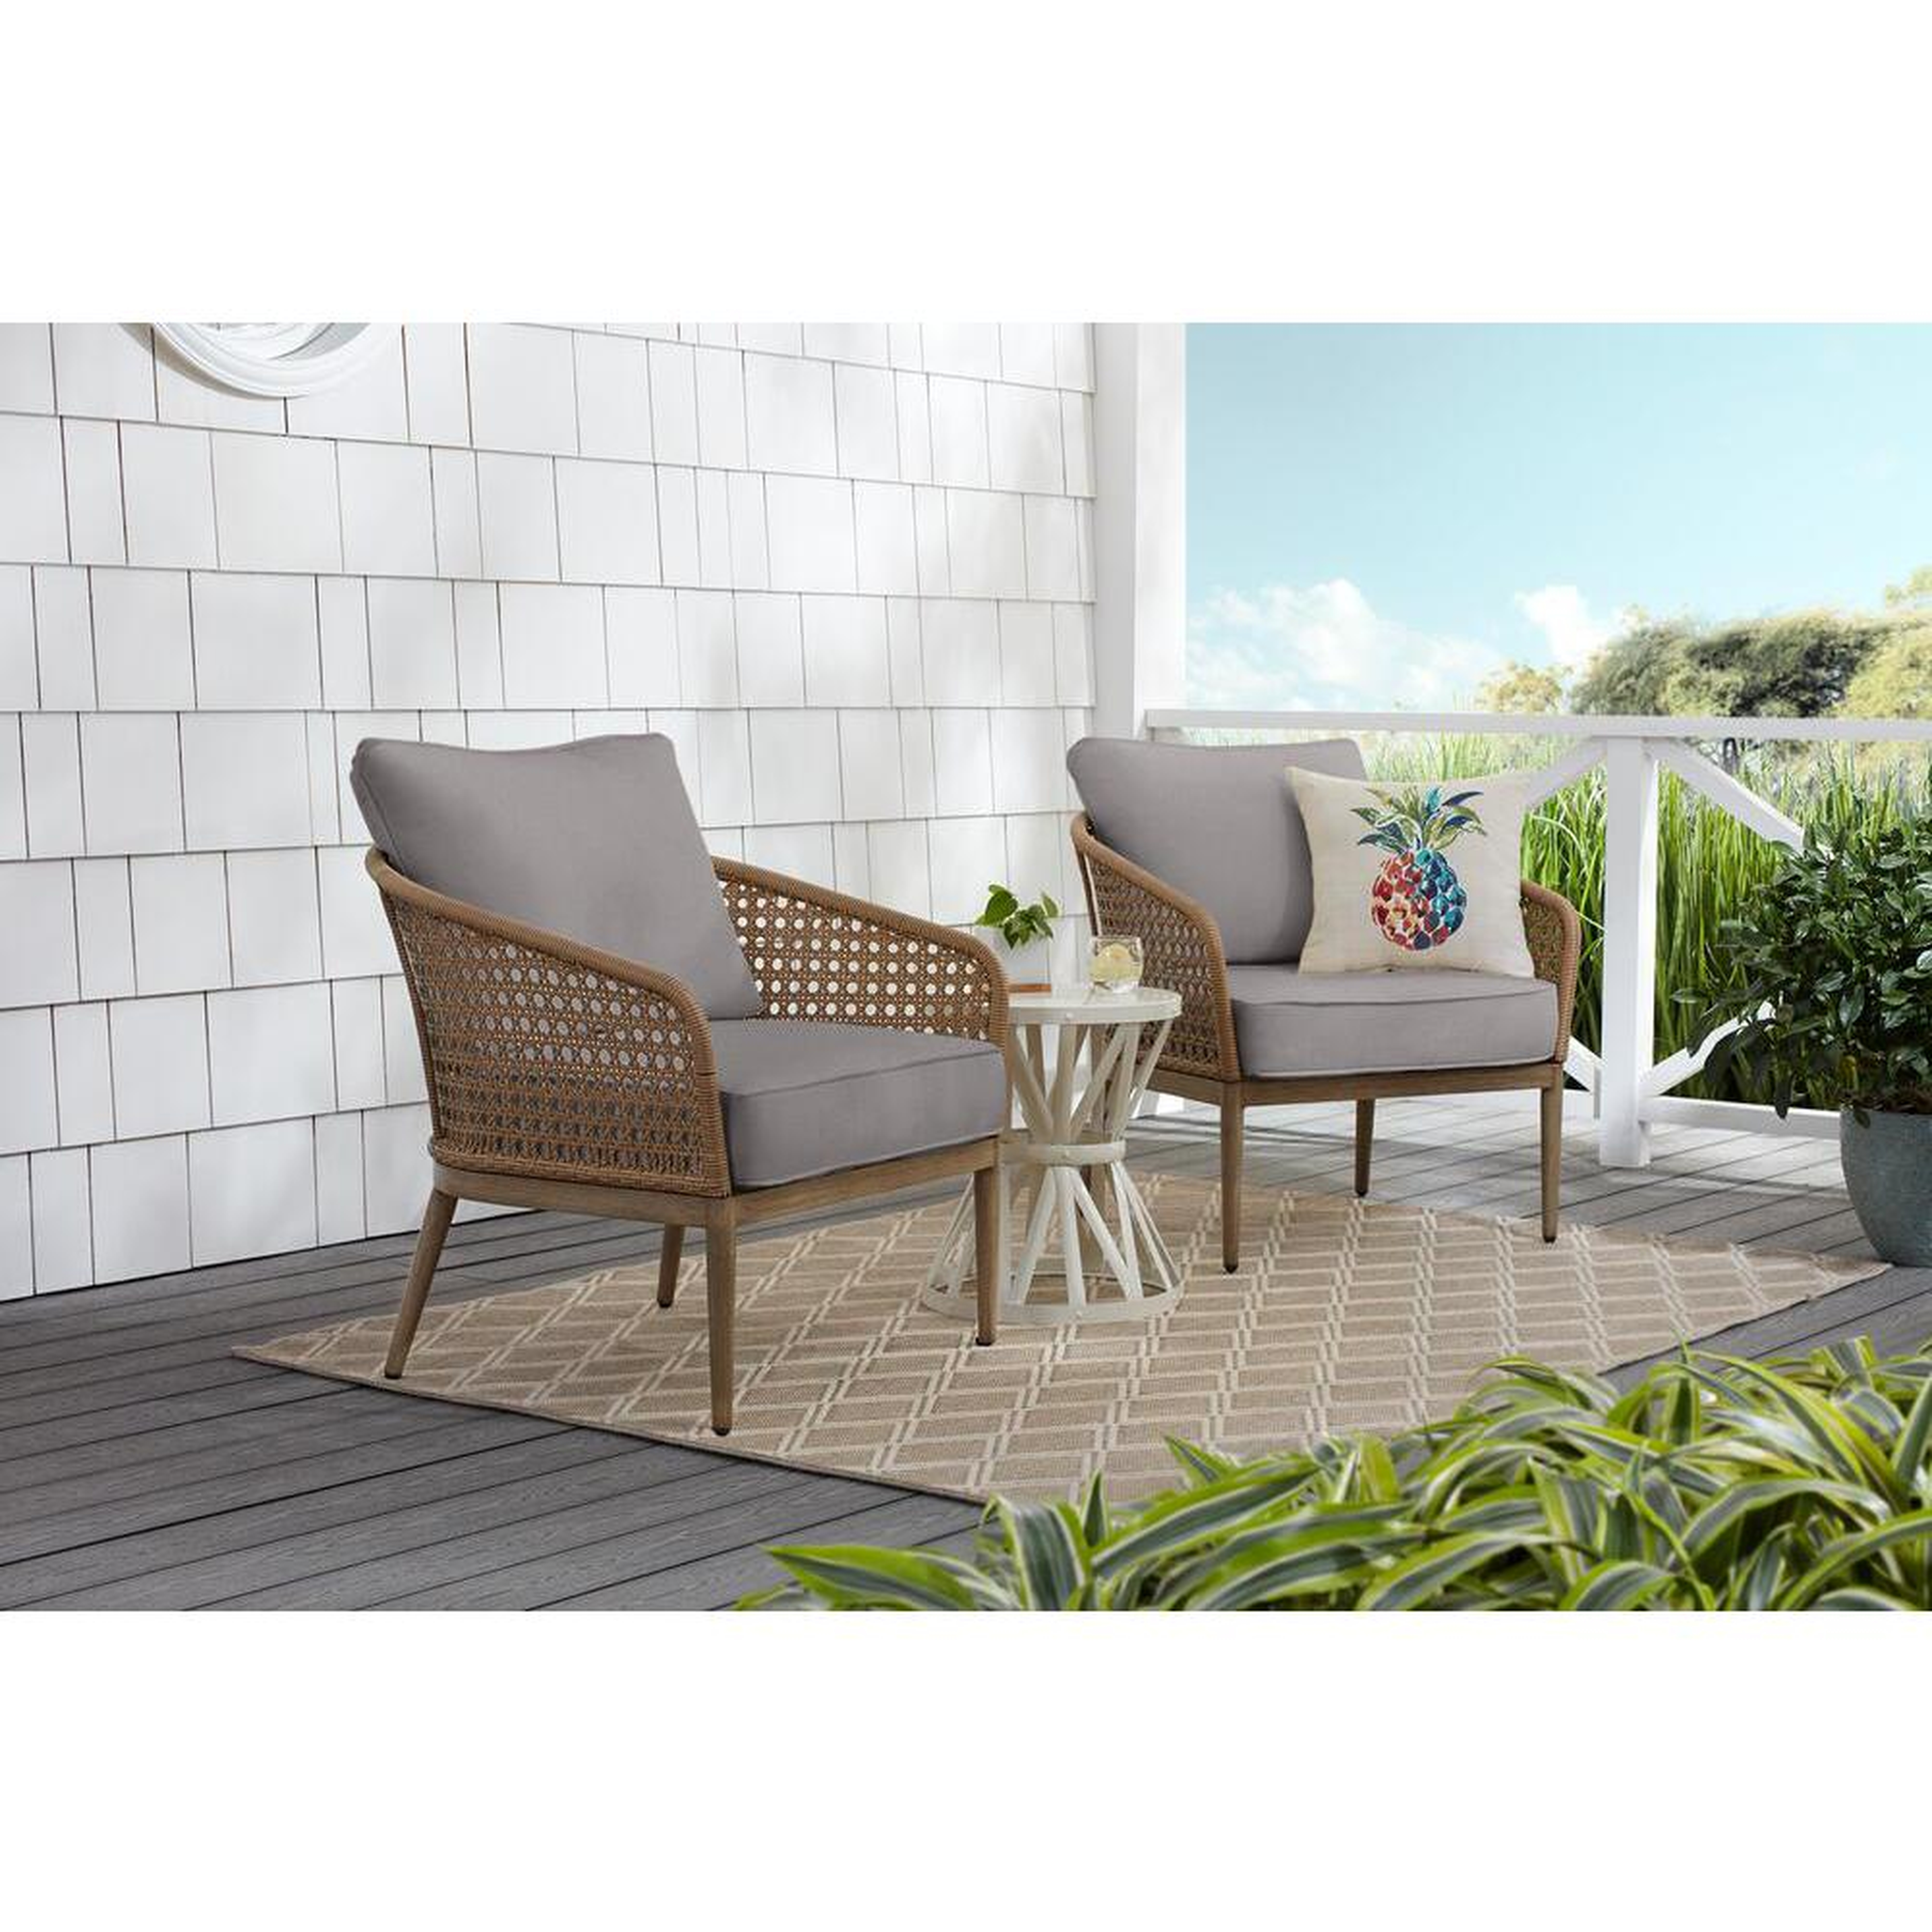 Hampton Bay Coral Vista Brown Wicker Outdoor Patio Lounge Chair with CushionGuard Stone Gray Cushions (2-Pack) - Home Depot